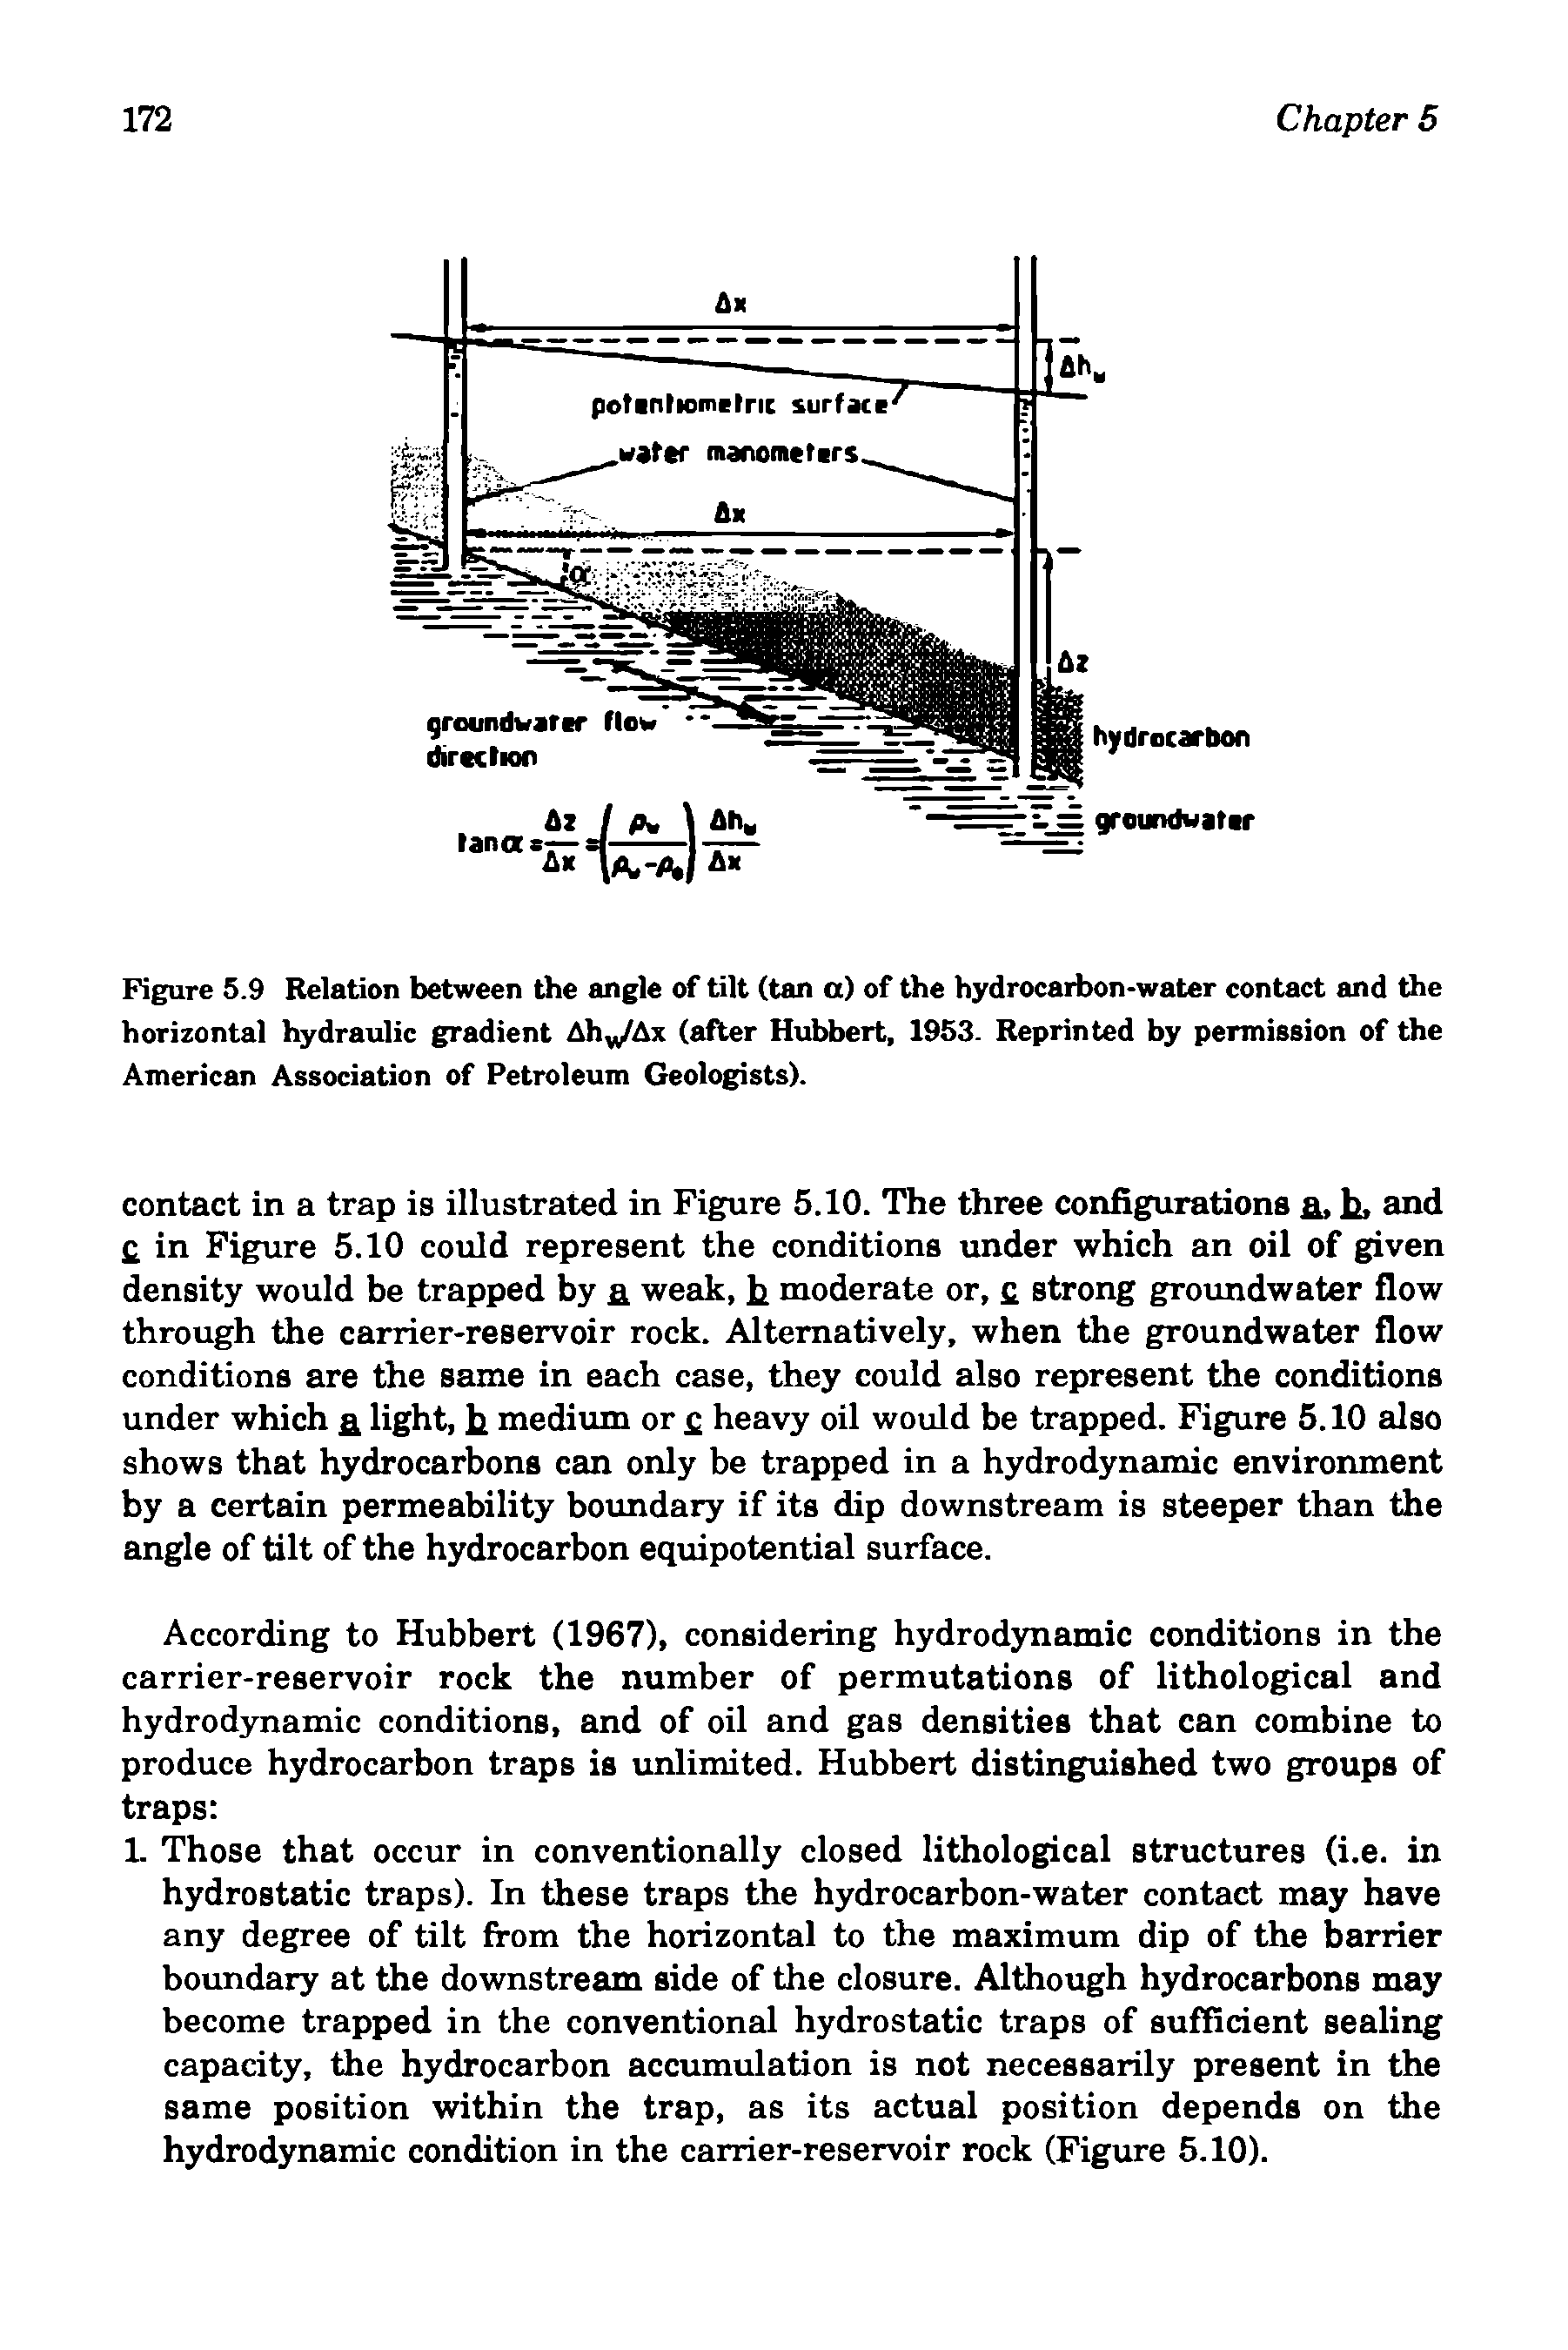 Figure 5.9 Relation between the angle of tilt (tan a) of the hydrocarbon-water contact and the horizontal hydraulic gradient Ahy/Ax (after Hubbert, 1953. Reprinted by permission of the American Association of Petroleum Geologists).